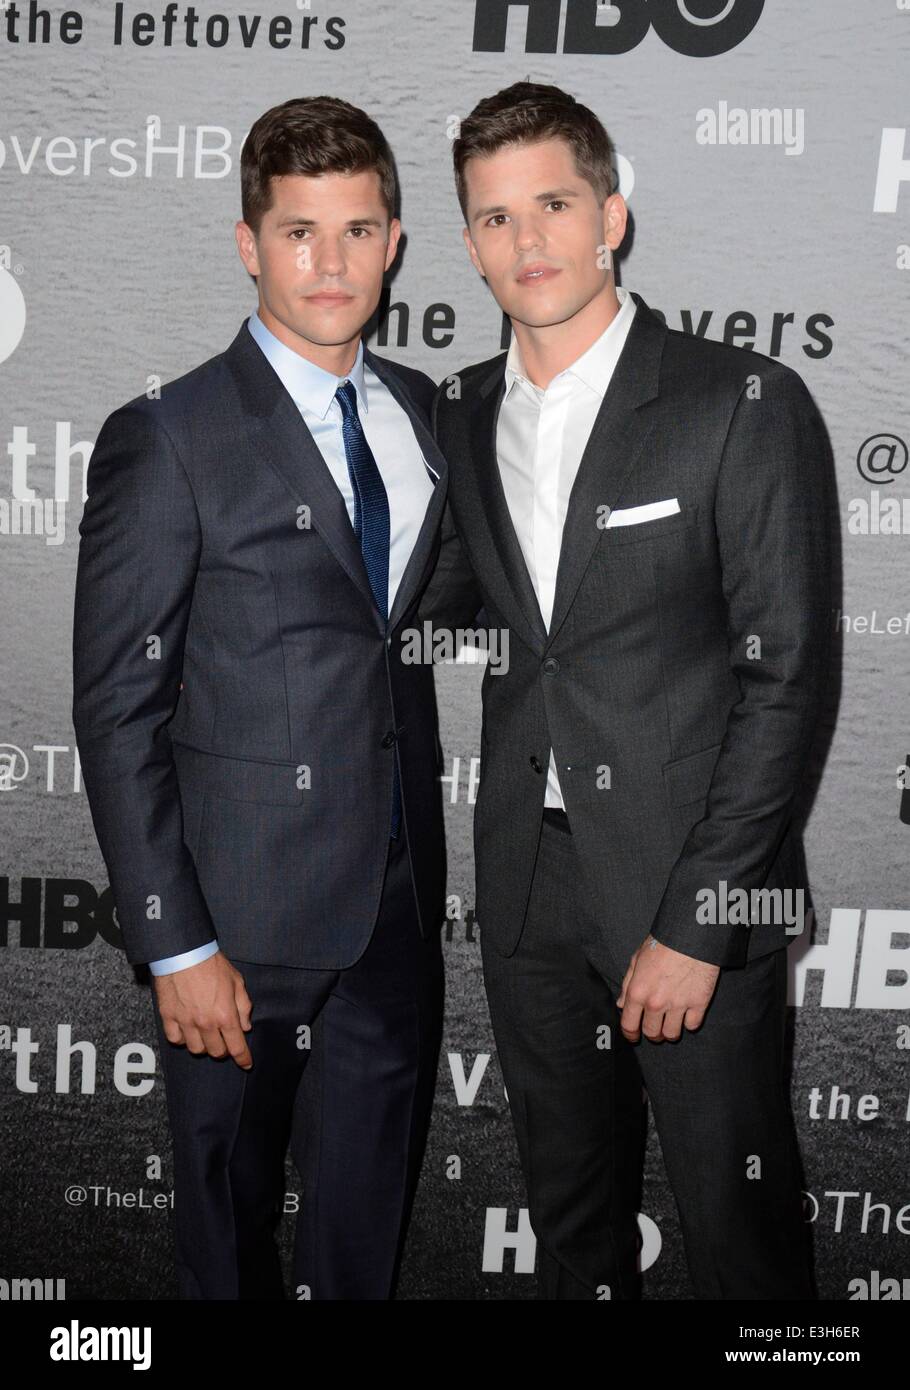 New York, NY, USA. 23rd June, 2014. Max Carver, Charlie Carver at arrivals  for THE LEFTOVERS Series Premiere on HBO, NYU Skirball Center for the  Performing Arts, New York, NY June 23,